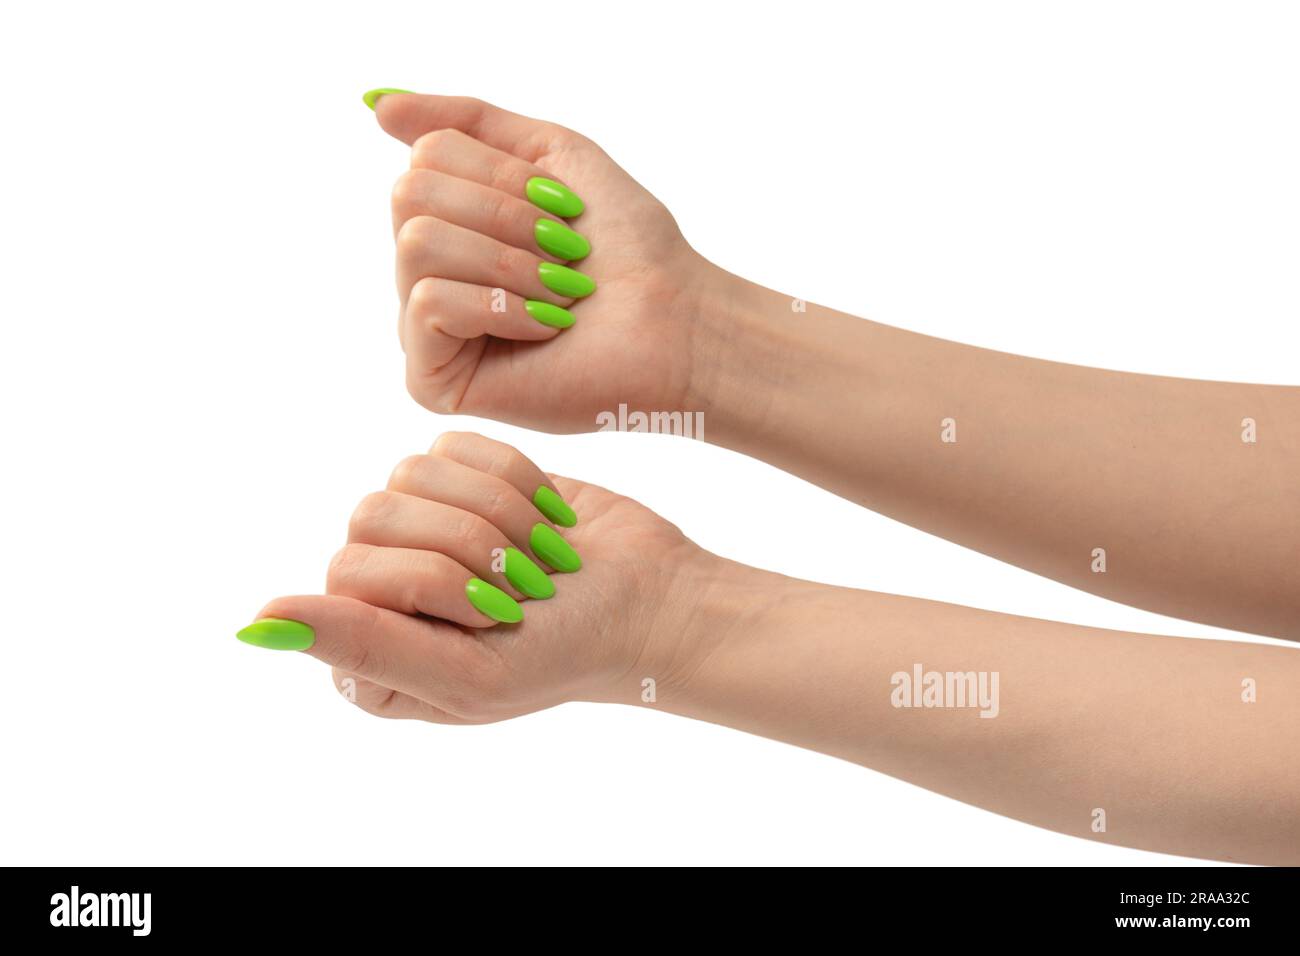 Hand of a woman with green naols hold some tiny or thin object, isolated on a white background. Stock Photo